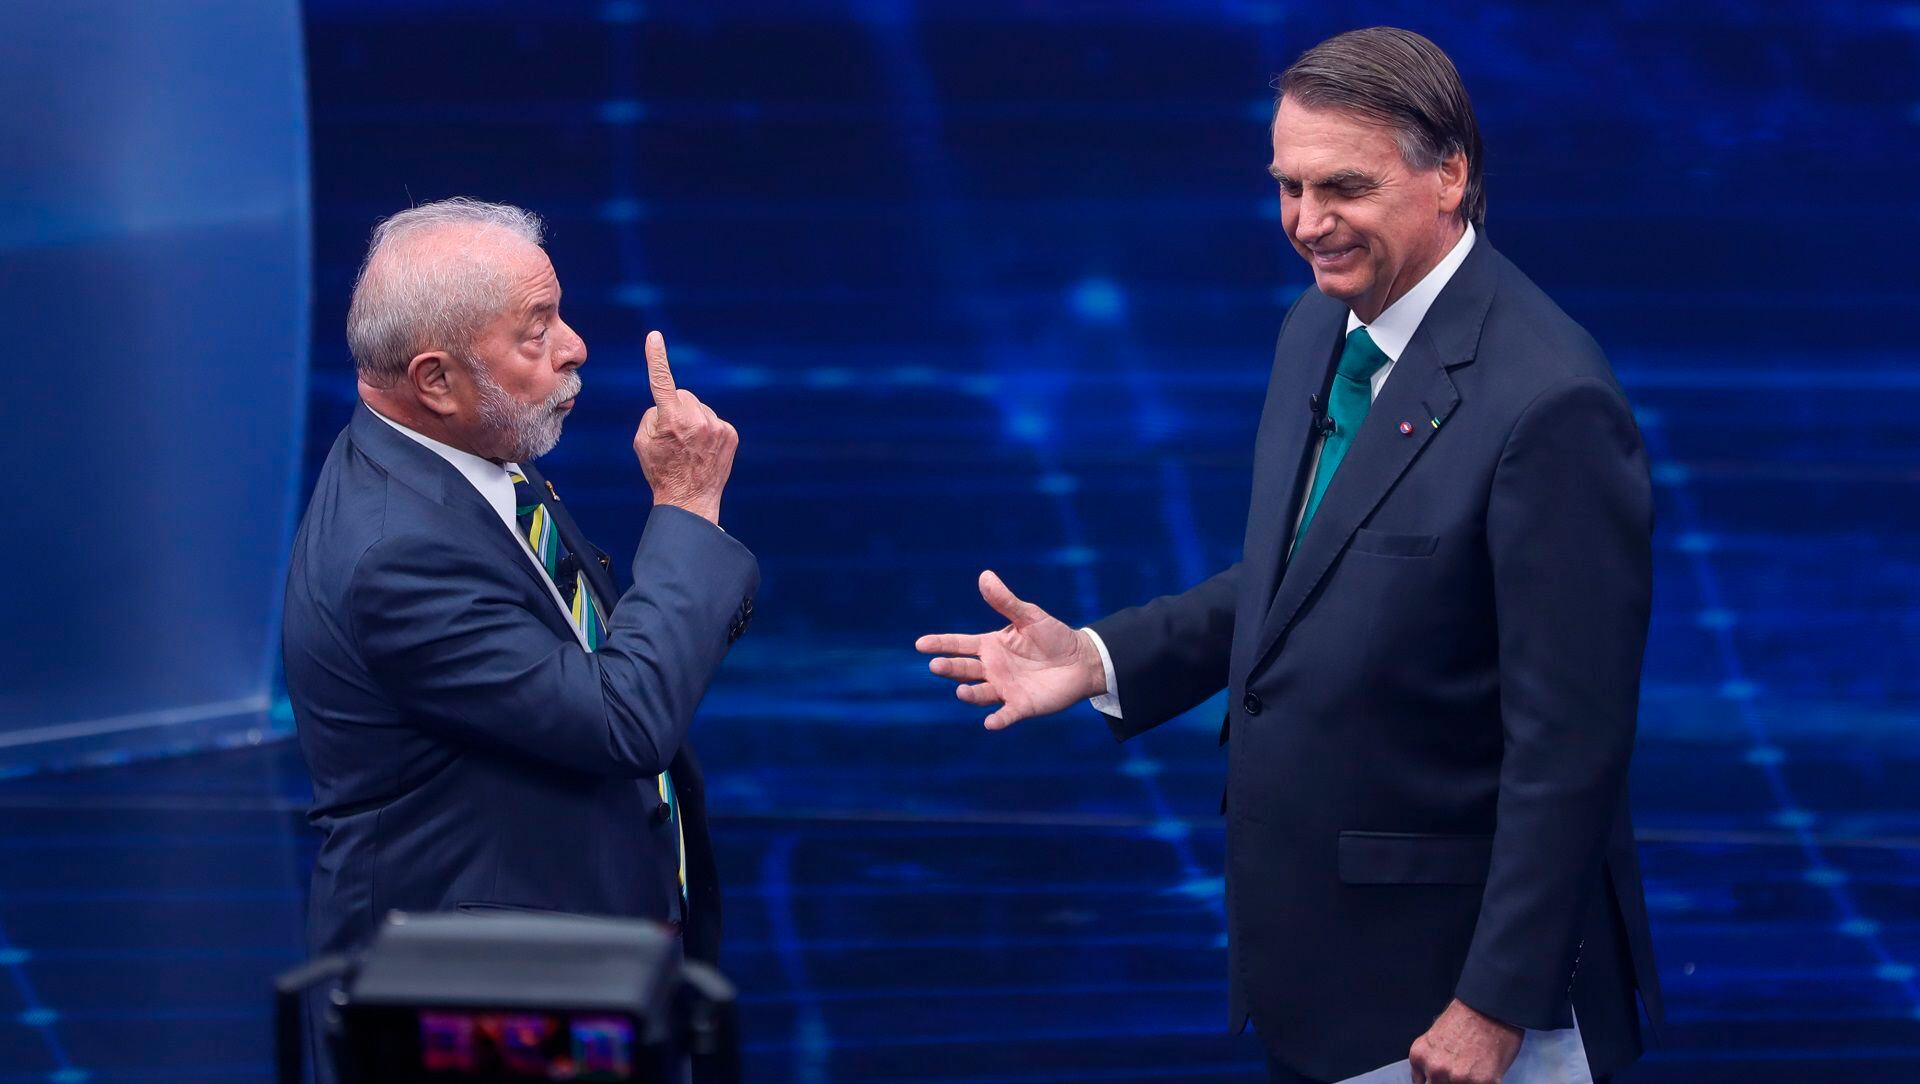 FILE - Brazil's former President Luiz Inacio Lula da Silva, left, and incumbent Jair Bolsonaro, take part in a presidential debate in Sao Paulo, Brazil, Oct. 16, 2022. During the first segment of their first one-on-one debate, they sought to convince poor voters that welfare payments will remain at their value. (AP Photo/Marcelo Chello, File)